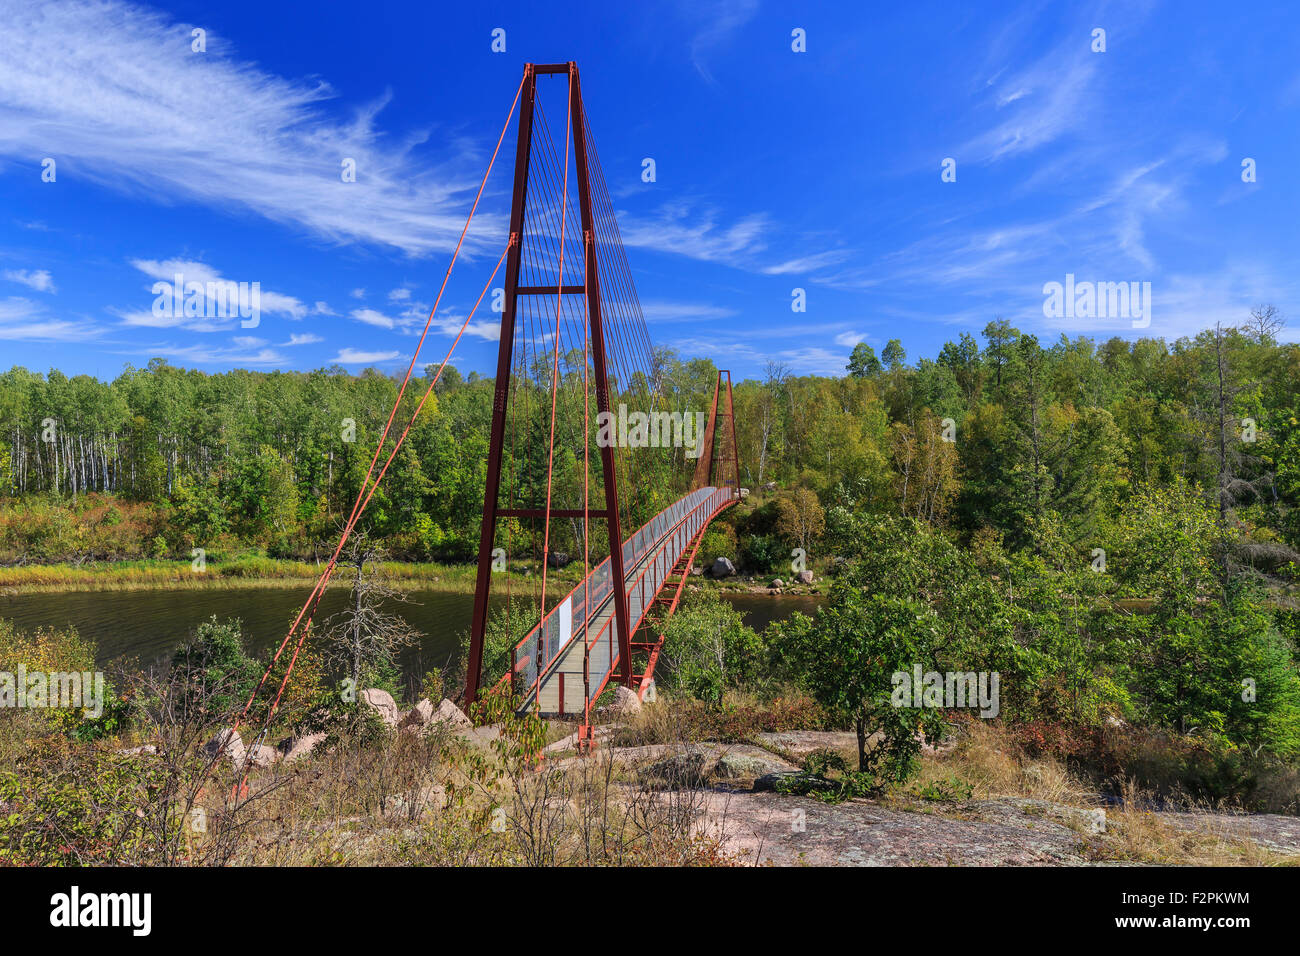 Bridge over the Whiteshell River, part of the The Great Trail, Whiteshell Provincial Park, Manitoba, Canada. Stock Photo